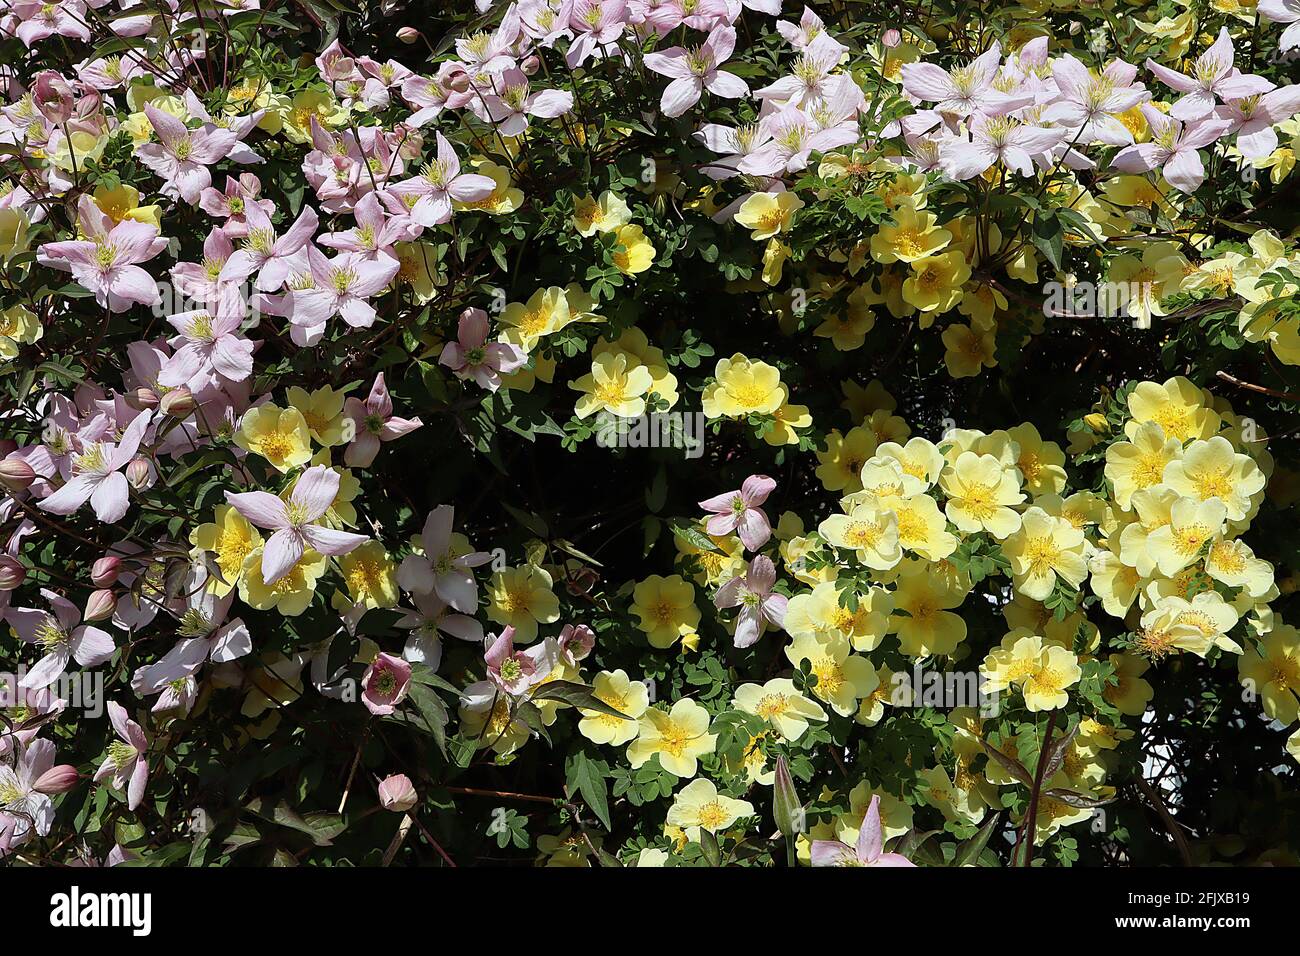 Clematis montana Rubens and Rosa xanthina Canary Bird Pale pink clematis and pale yellow single roses, both climbing plants,  April, England, UK Stock Photo